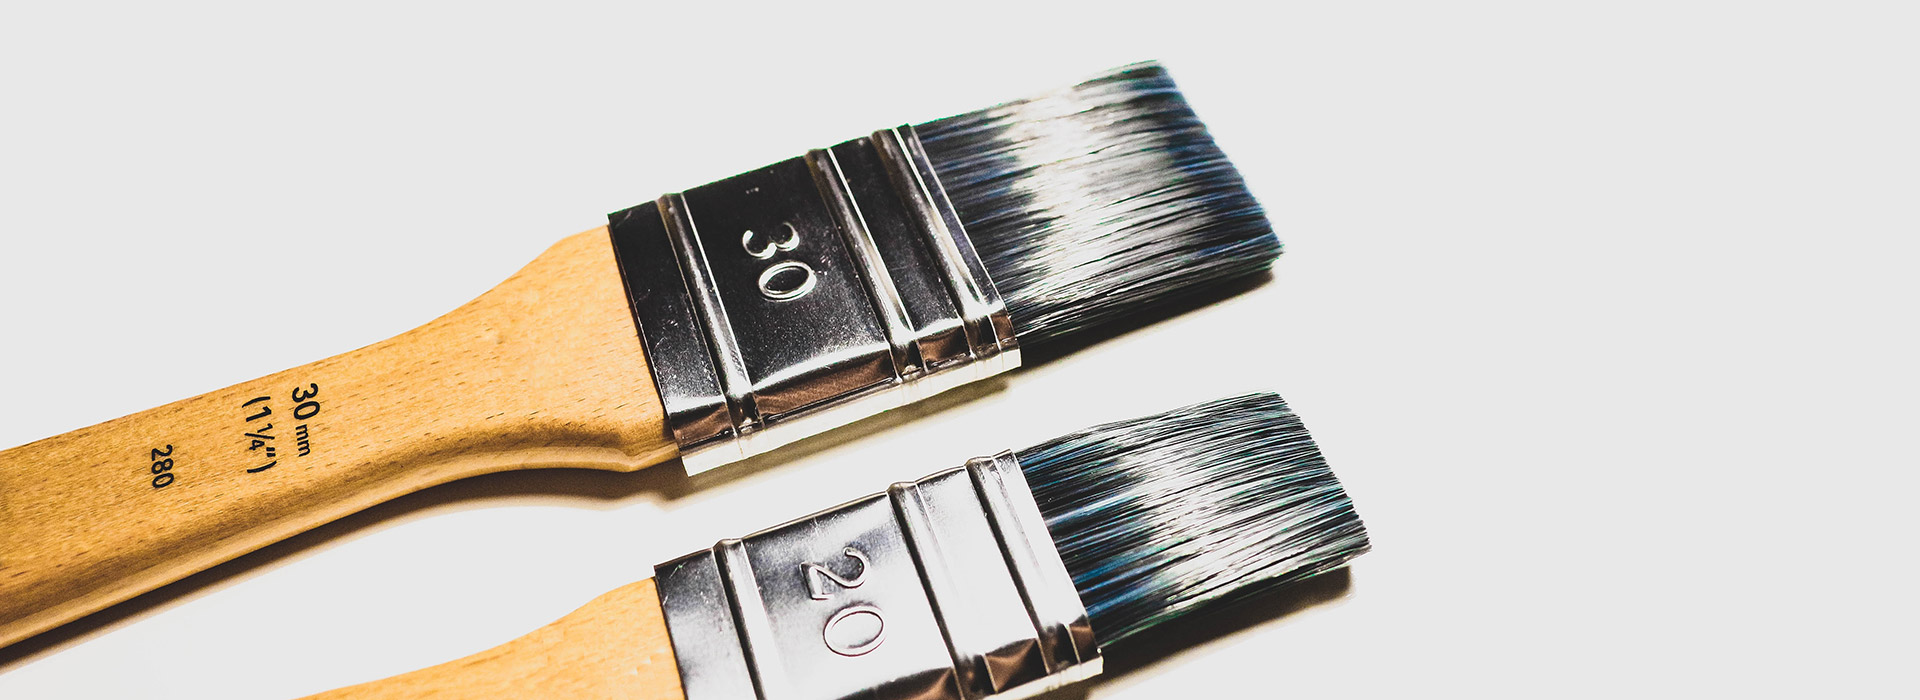 2 paint brushes, 30 mm and 20 mm, are laid on a white surface